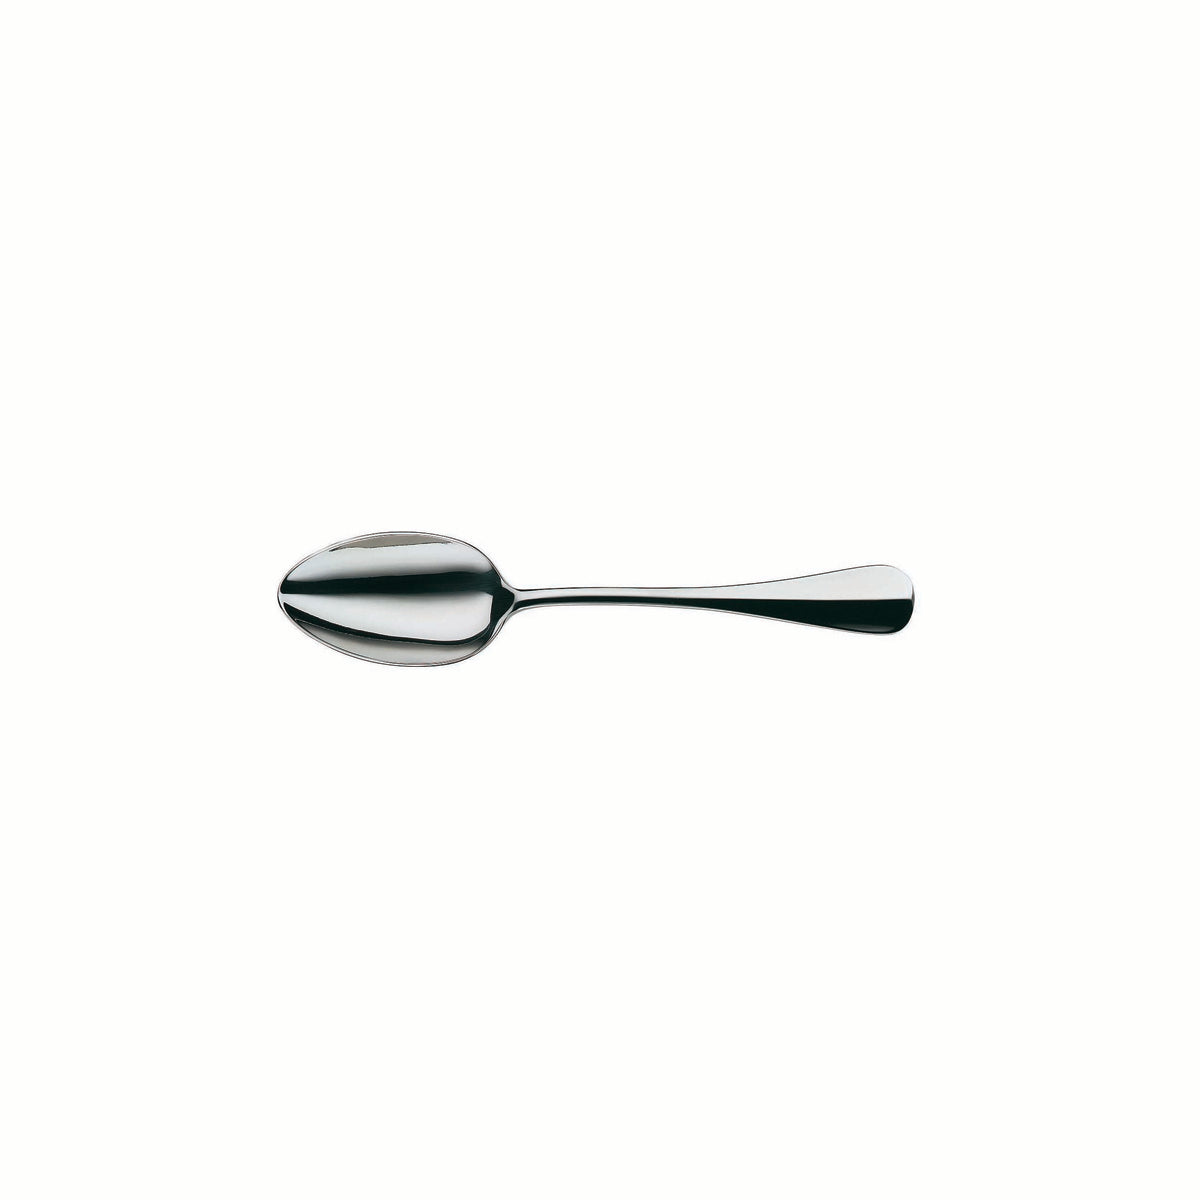 01.0115.6061 WMF Baguette Table Spoon Small Silverplated Tomkin Australia Hospitality Supplies